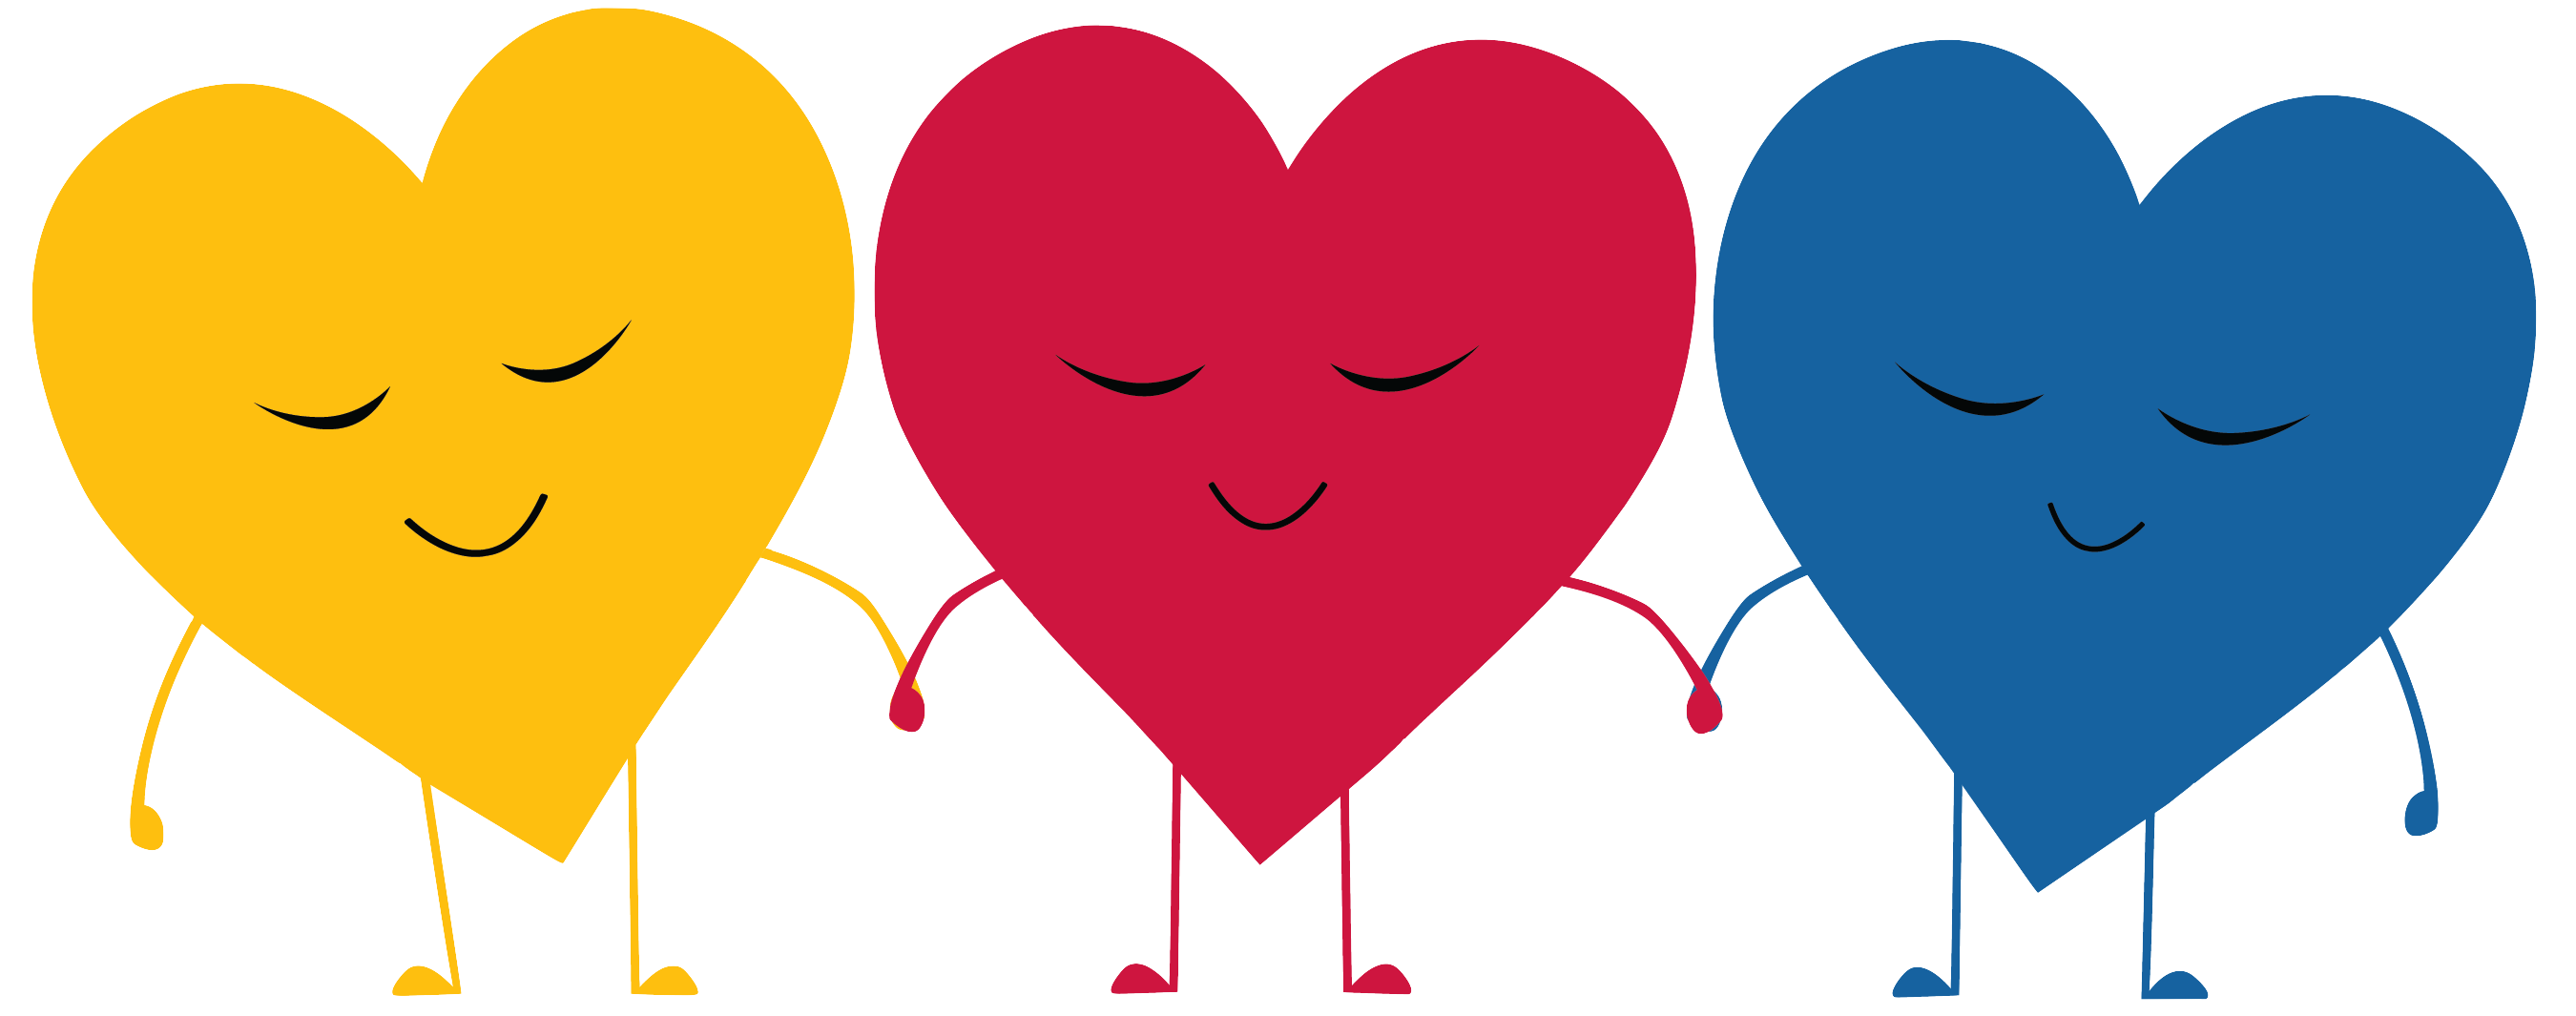 three hearts (yellow, red, and blue), holding hands and smiling